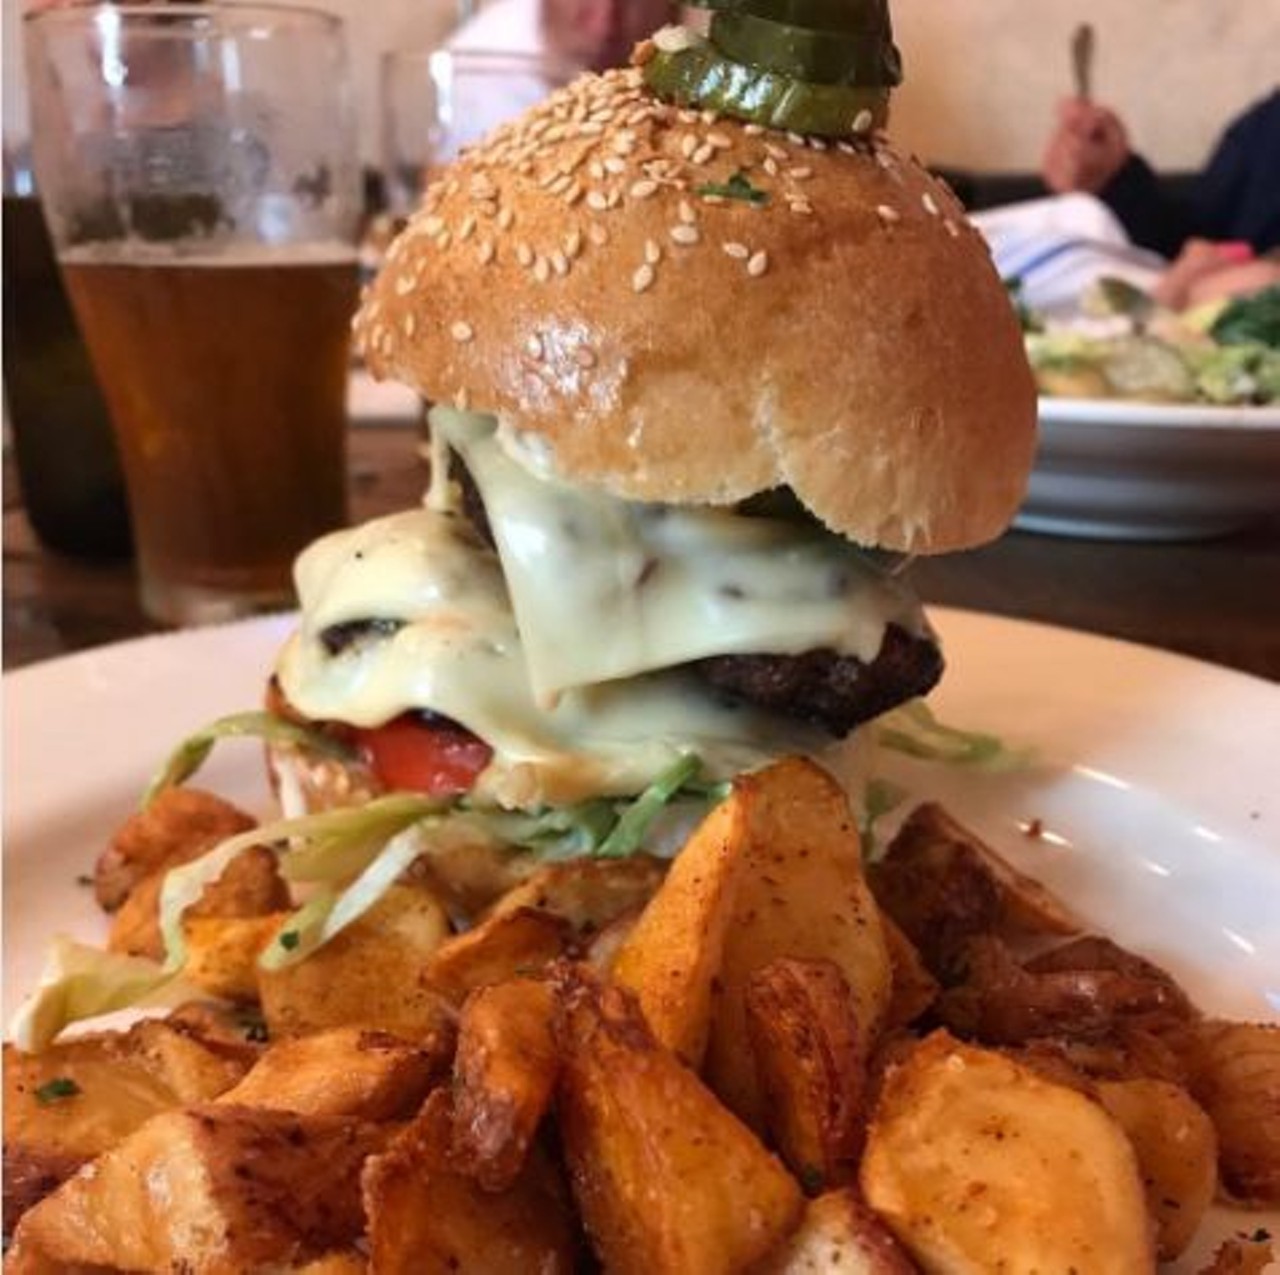 Southerleigh Fine Food & Brewery
136 E. Grayson St., Suite 120, (210) 455-5701, 
southerleigh.com
Burgers and beer, what a pair. Enjoy some of the most mouthwatering burgers at Southerleigh.
Photo via Instagram
quebel_06
